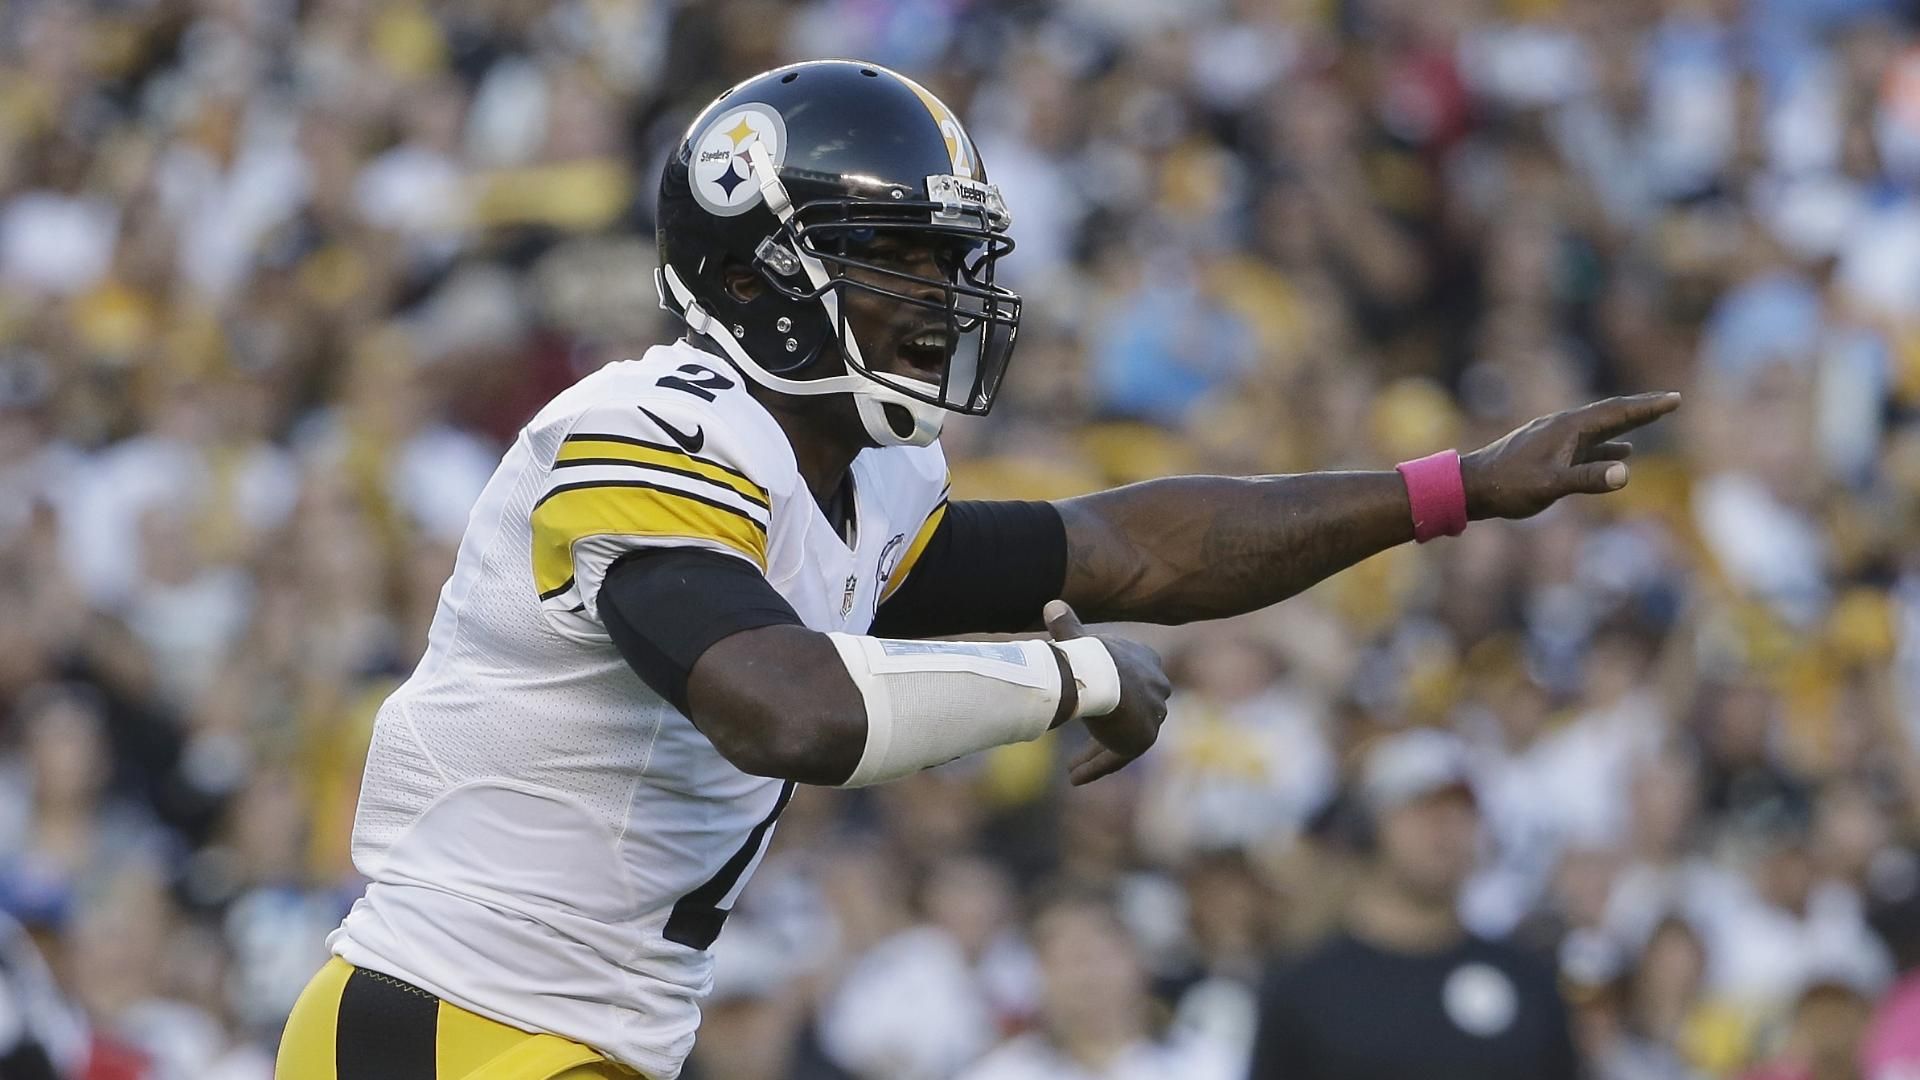 Exhilarating win for Vick, Steelers on MNF